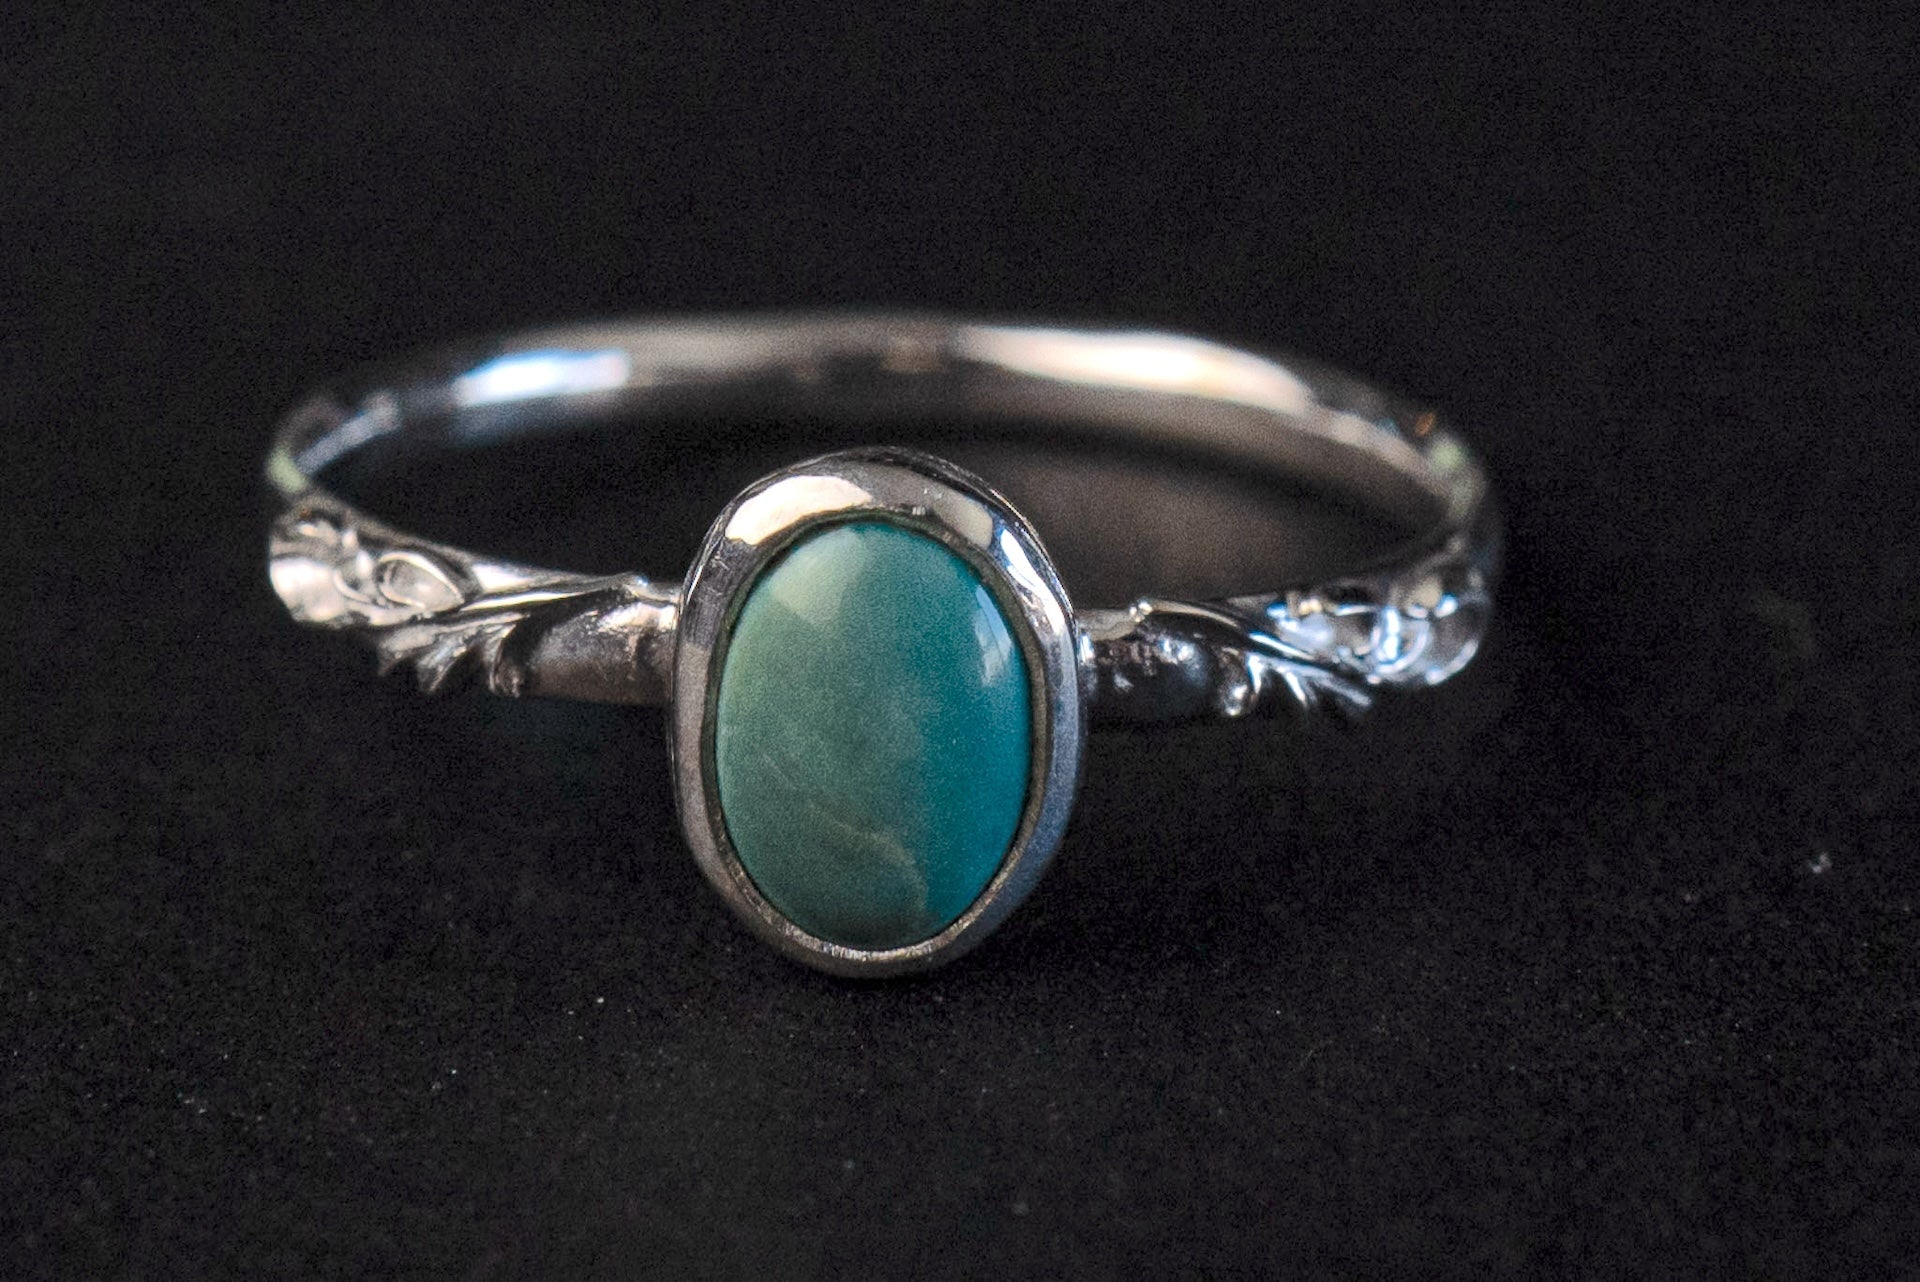 Legend "Vivid Flora" Silver Ring With Turquoise (R-75-TQ)